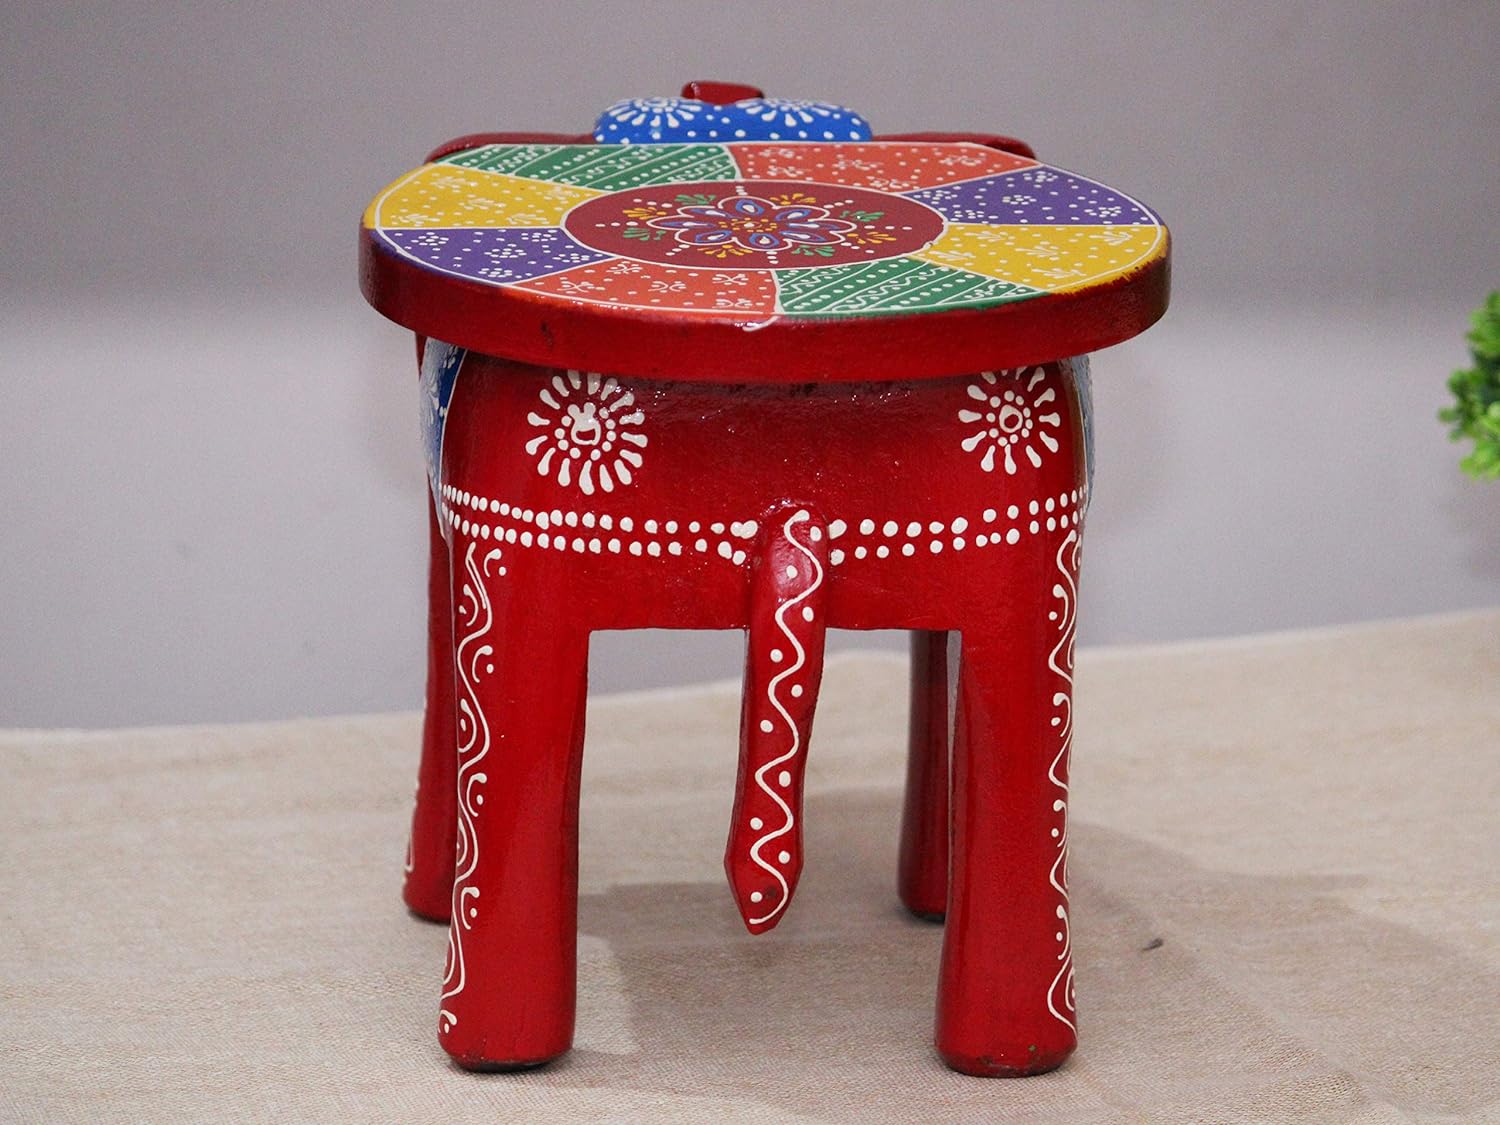 Hand-Painted Colorful Wooden Elephant Stool (Red)